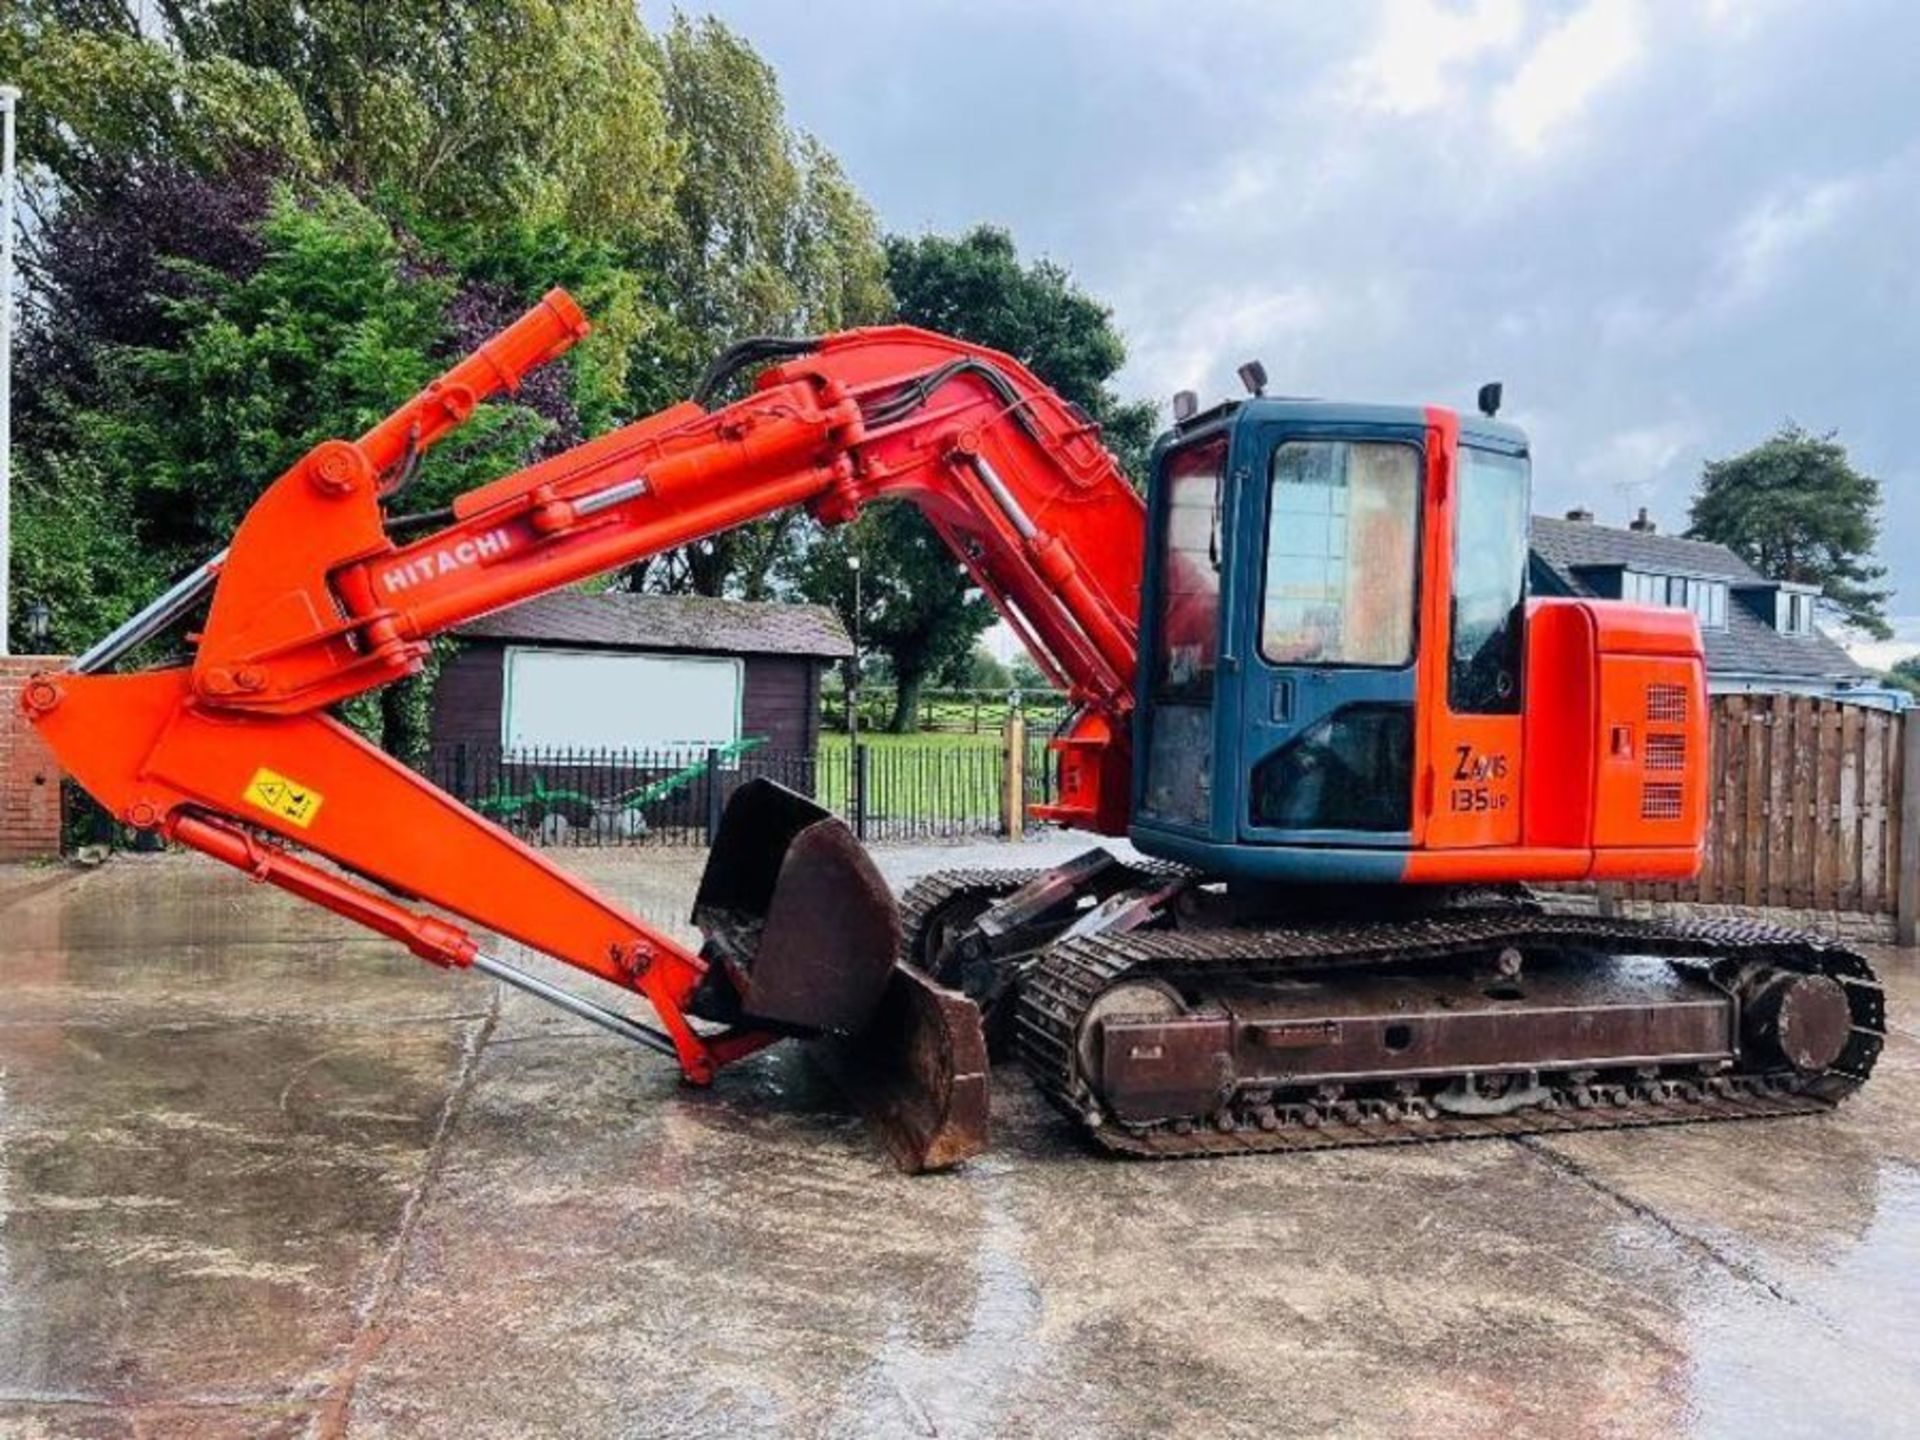 HITACHI ZAXIS 135UR TRACKED EXCAVATOR C/W FRONT BLADE - Image 13 of 17